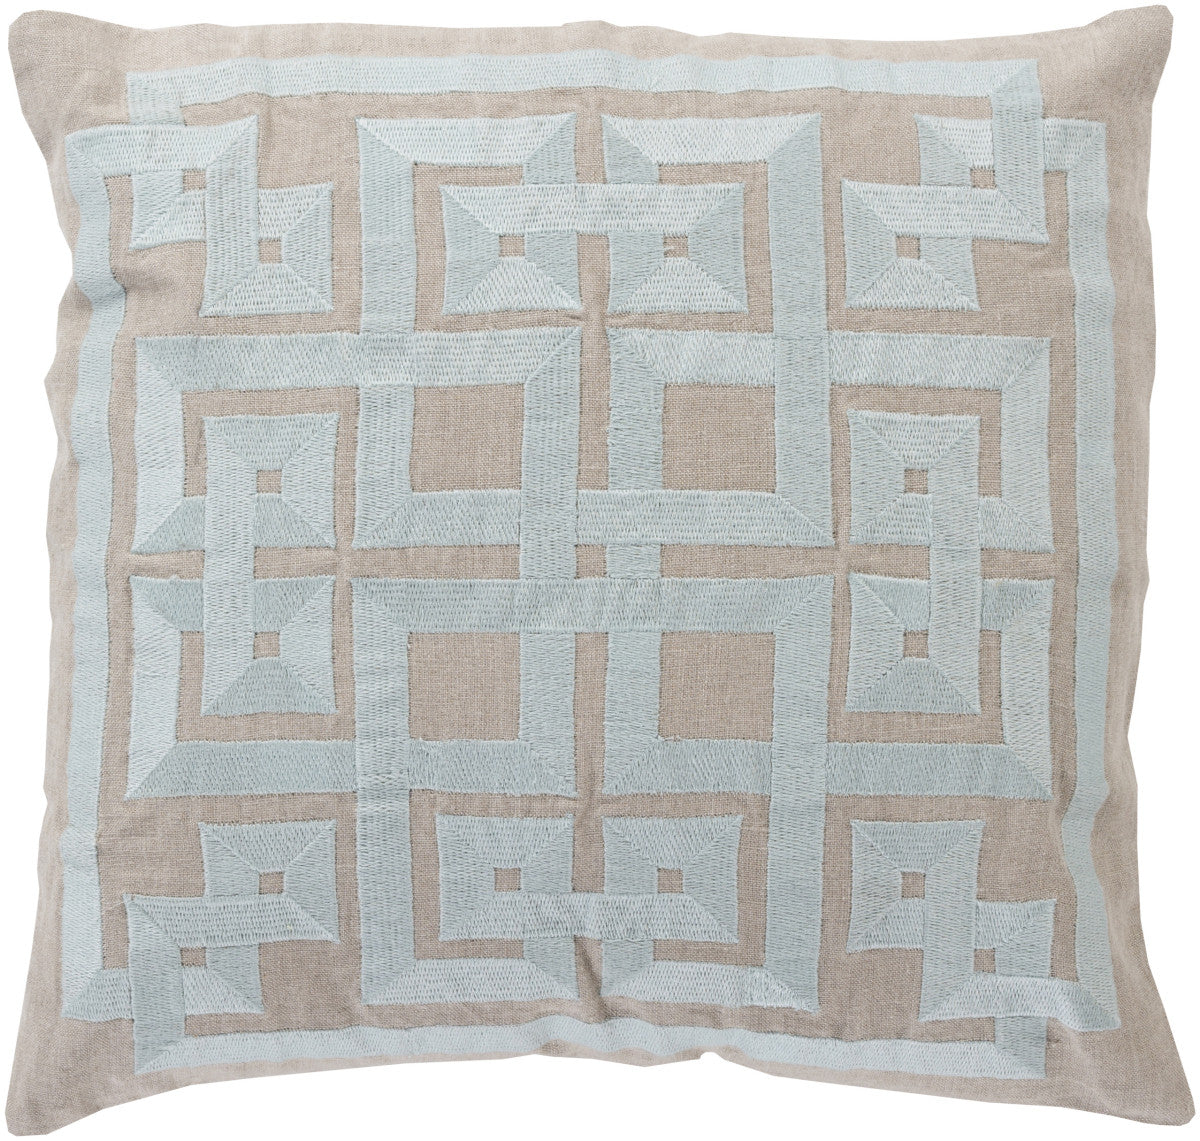 Surya Gramercy Intersected Geometrics LD-010 Pillow by Beth Lacefield